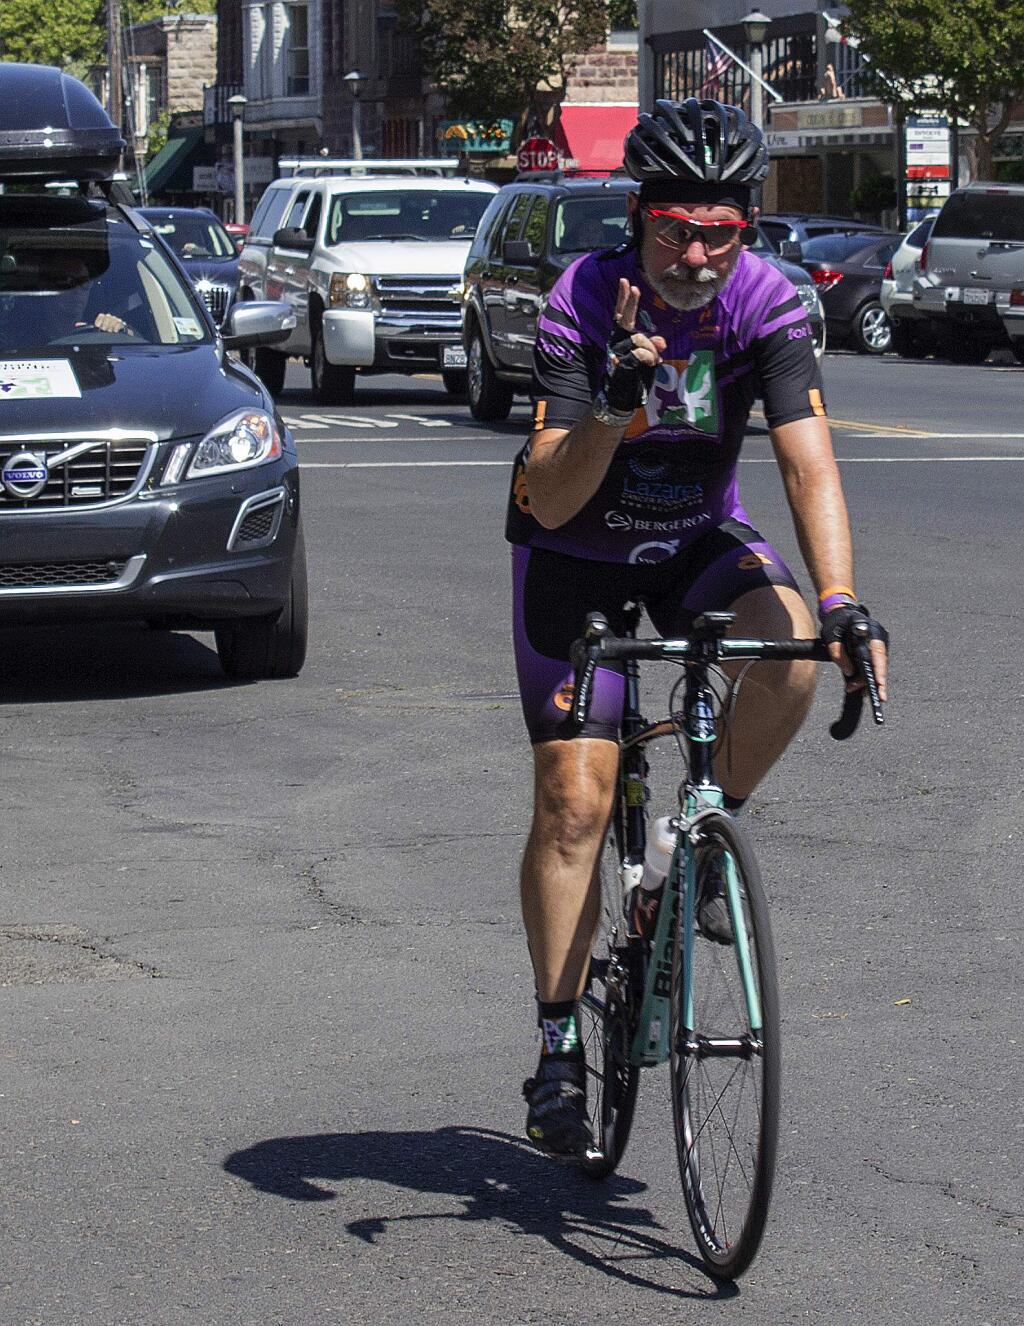 William Rohrs/Index-TribuneCyclist Eric McIntyre passed through Sonoma last week as part of a 7,200-mile bike ride to raise funding and awareness for pancreatic cancer.